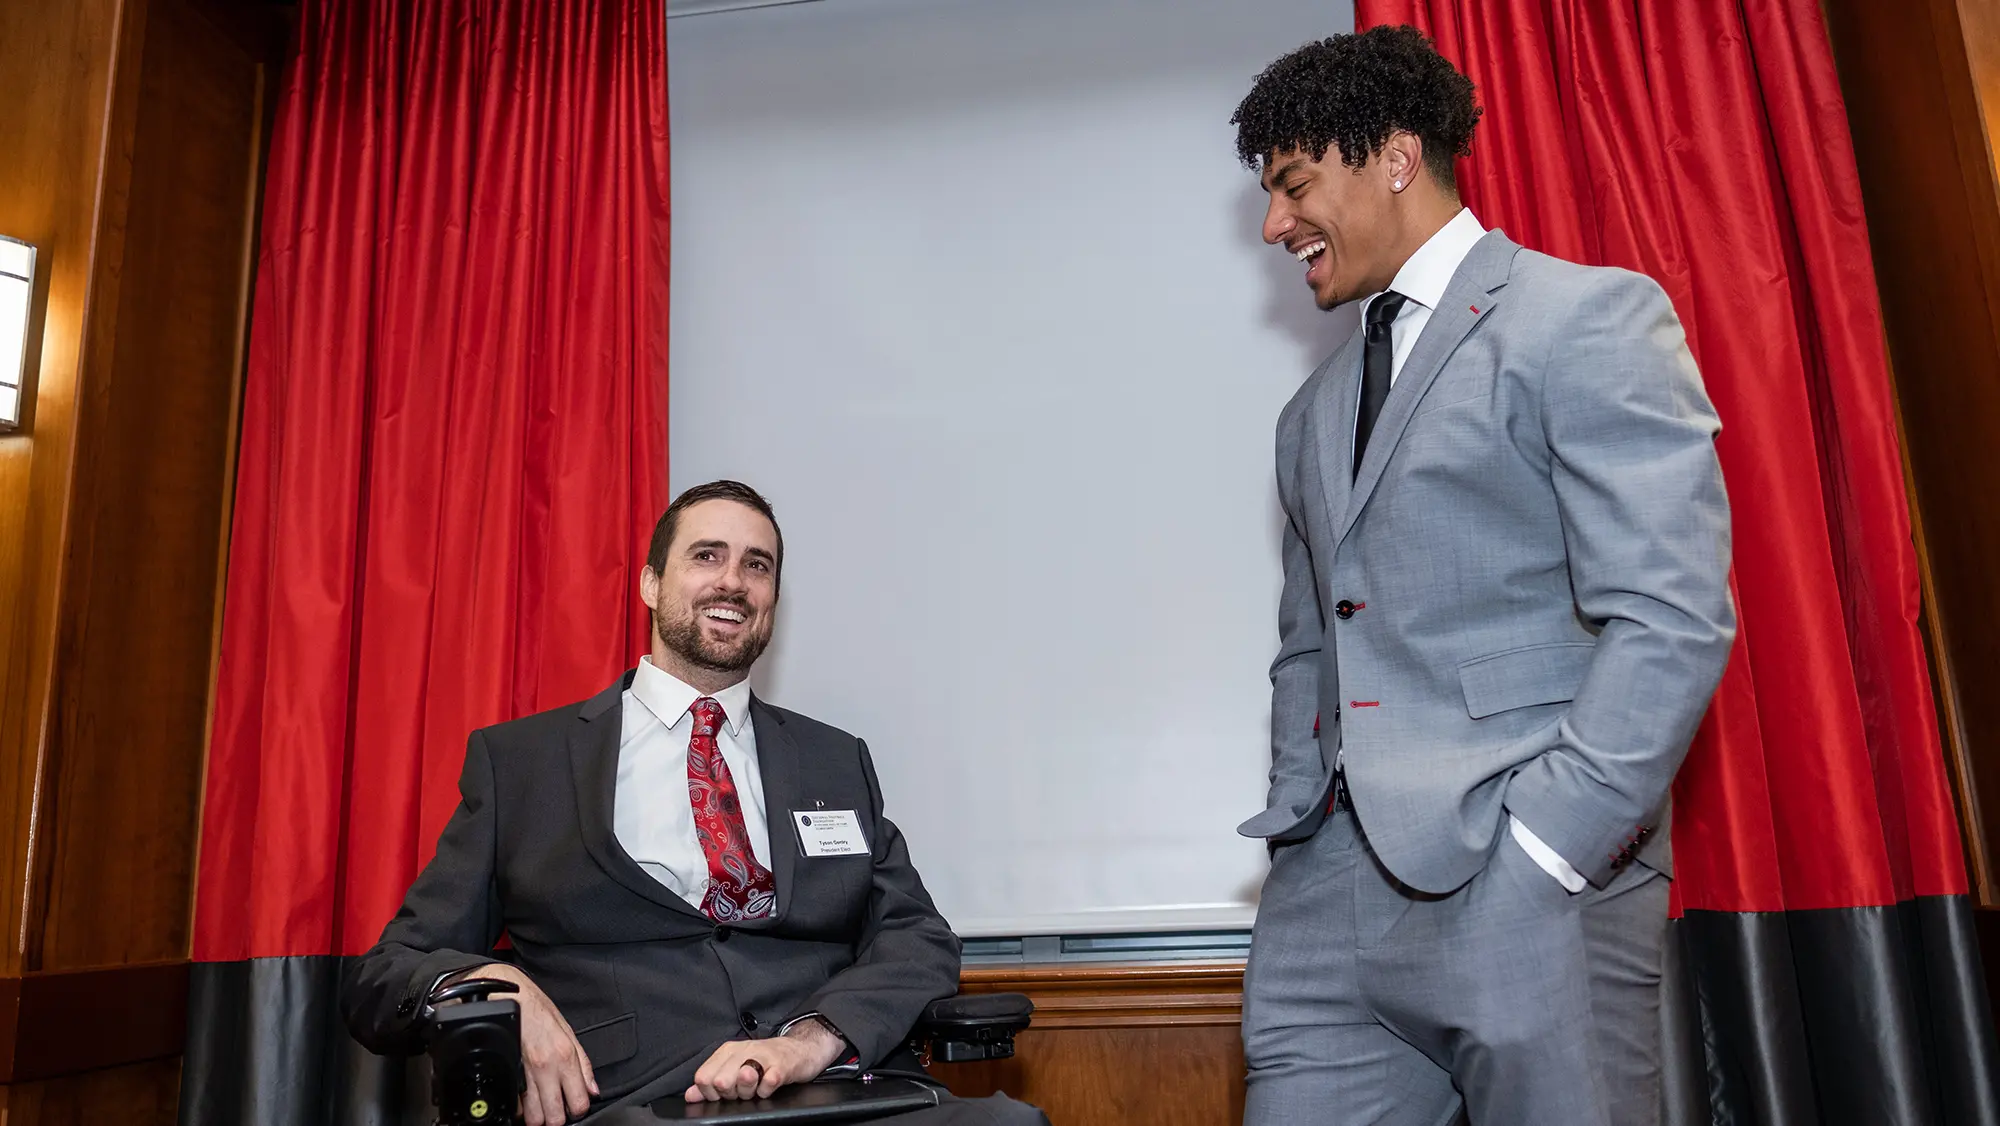 A white man seated in a wheelchair talks with a black man standing next to him and looking at him. Both laugh as they chat in their distinguished-looking suits, which say they’re at an important event.